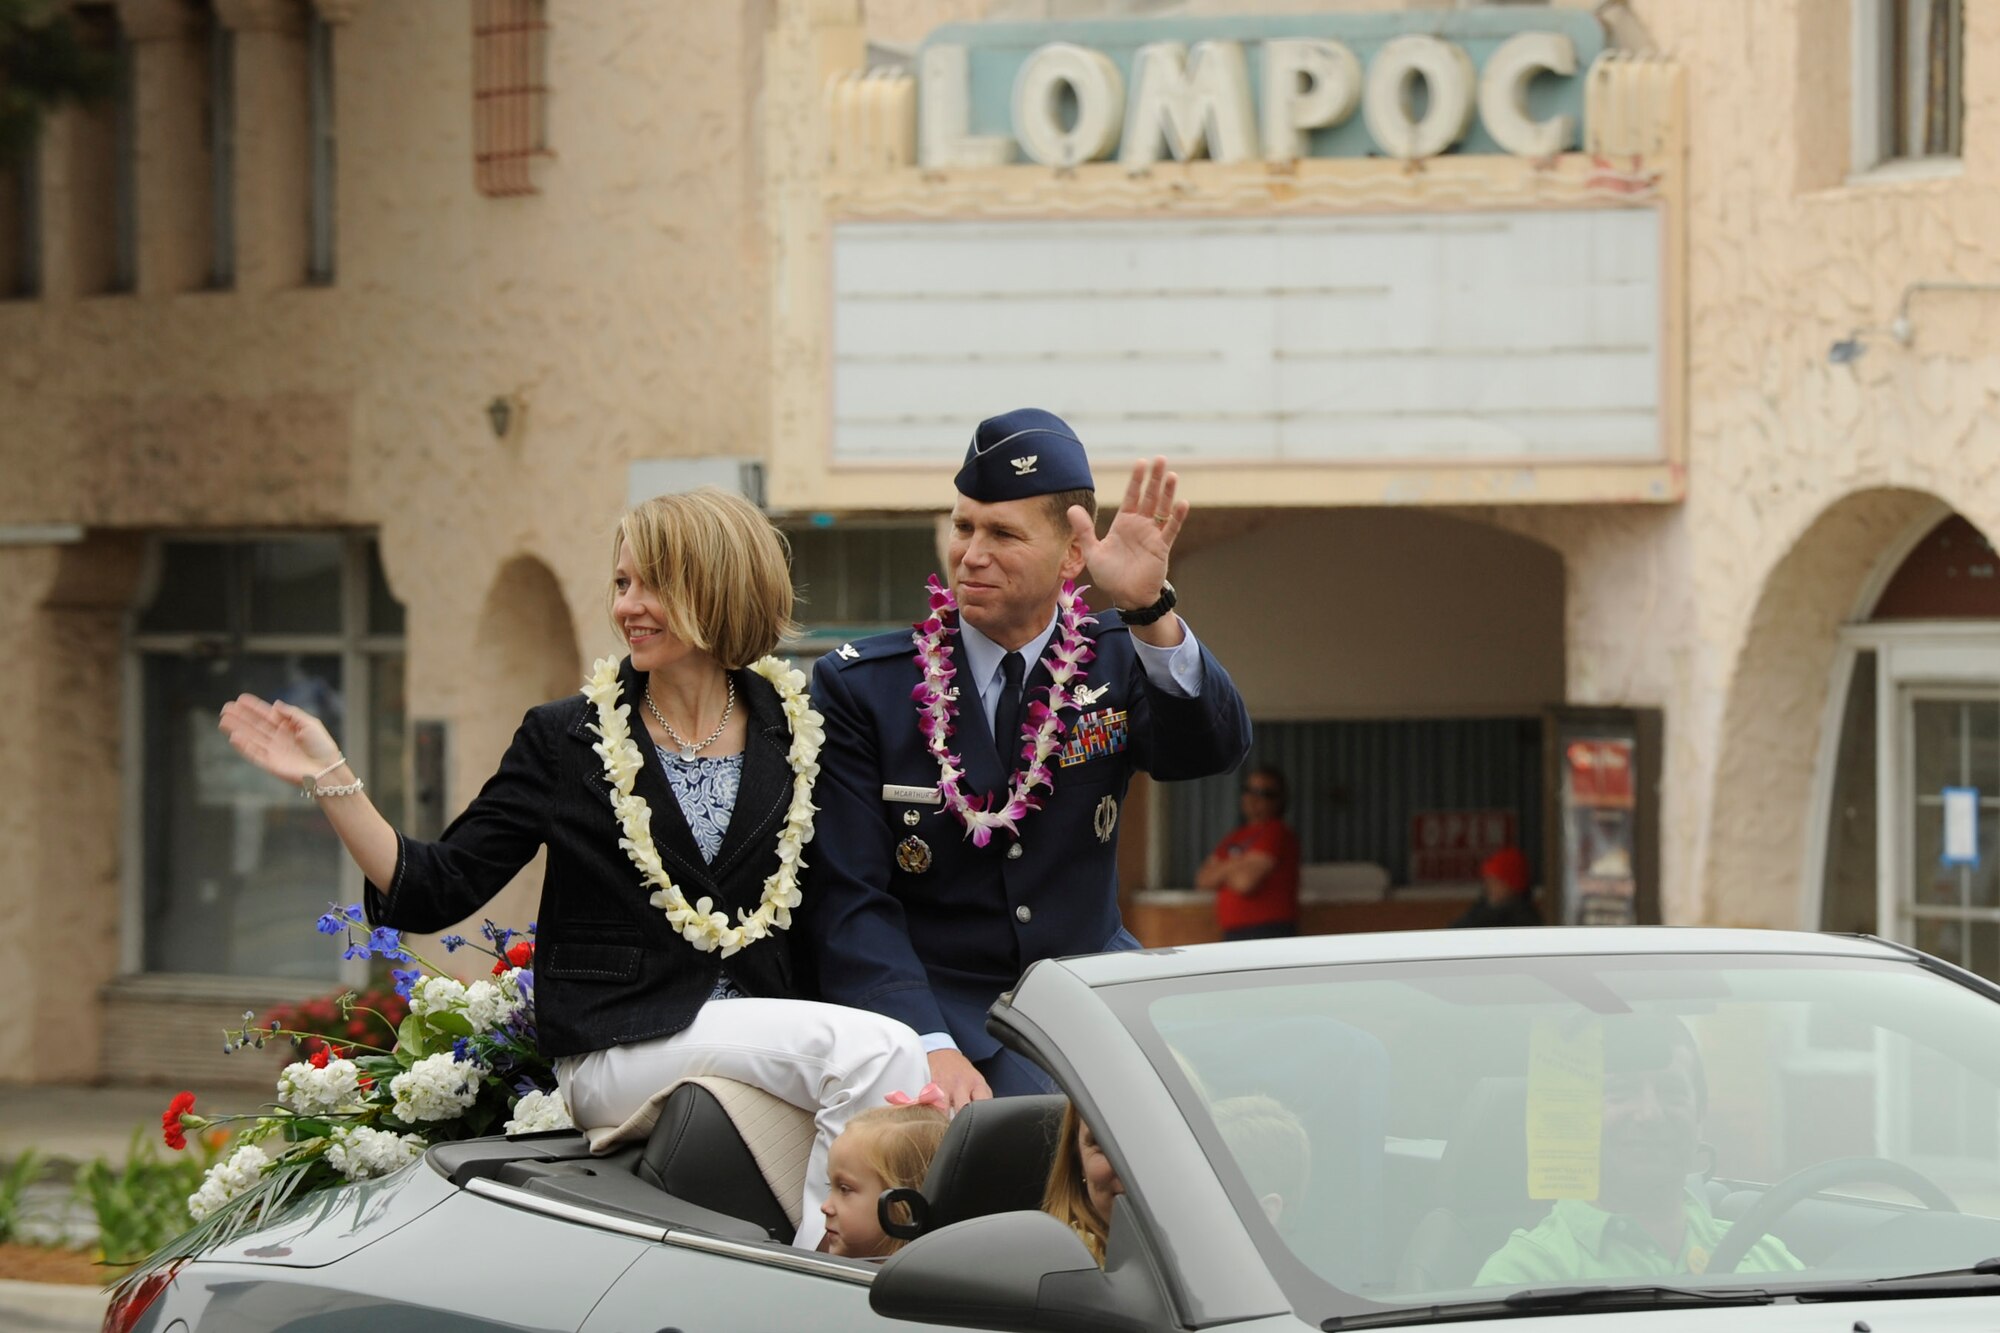 VANDENBERG AIR FORCE BASE, Calif. -- Col. Brent McArther, 30th Space Wing vice commander, and his family wave to parade watchers during the city of Lompoc's 60th Annual Flower Festival Saturday, June 23, 2012. The parade is part of a five day celebration of Lompoc?s flower fields and culture. (U.S. Air Force photo/Staff Sgt. Levi Riendeau)